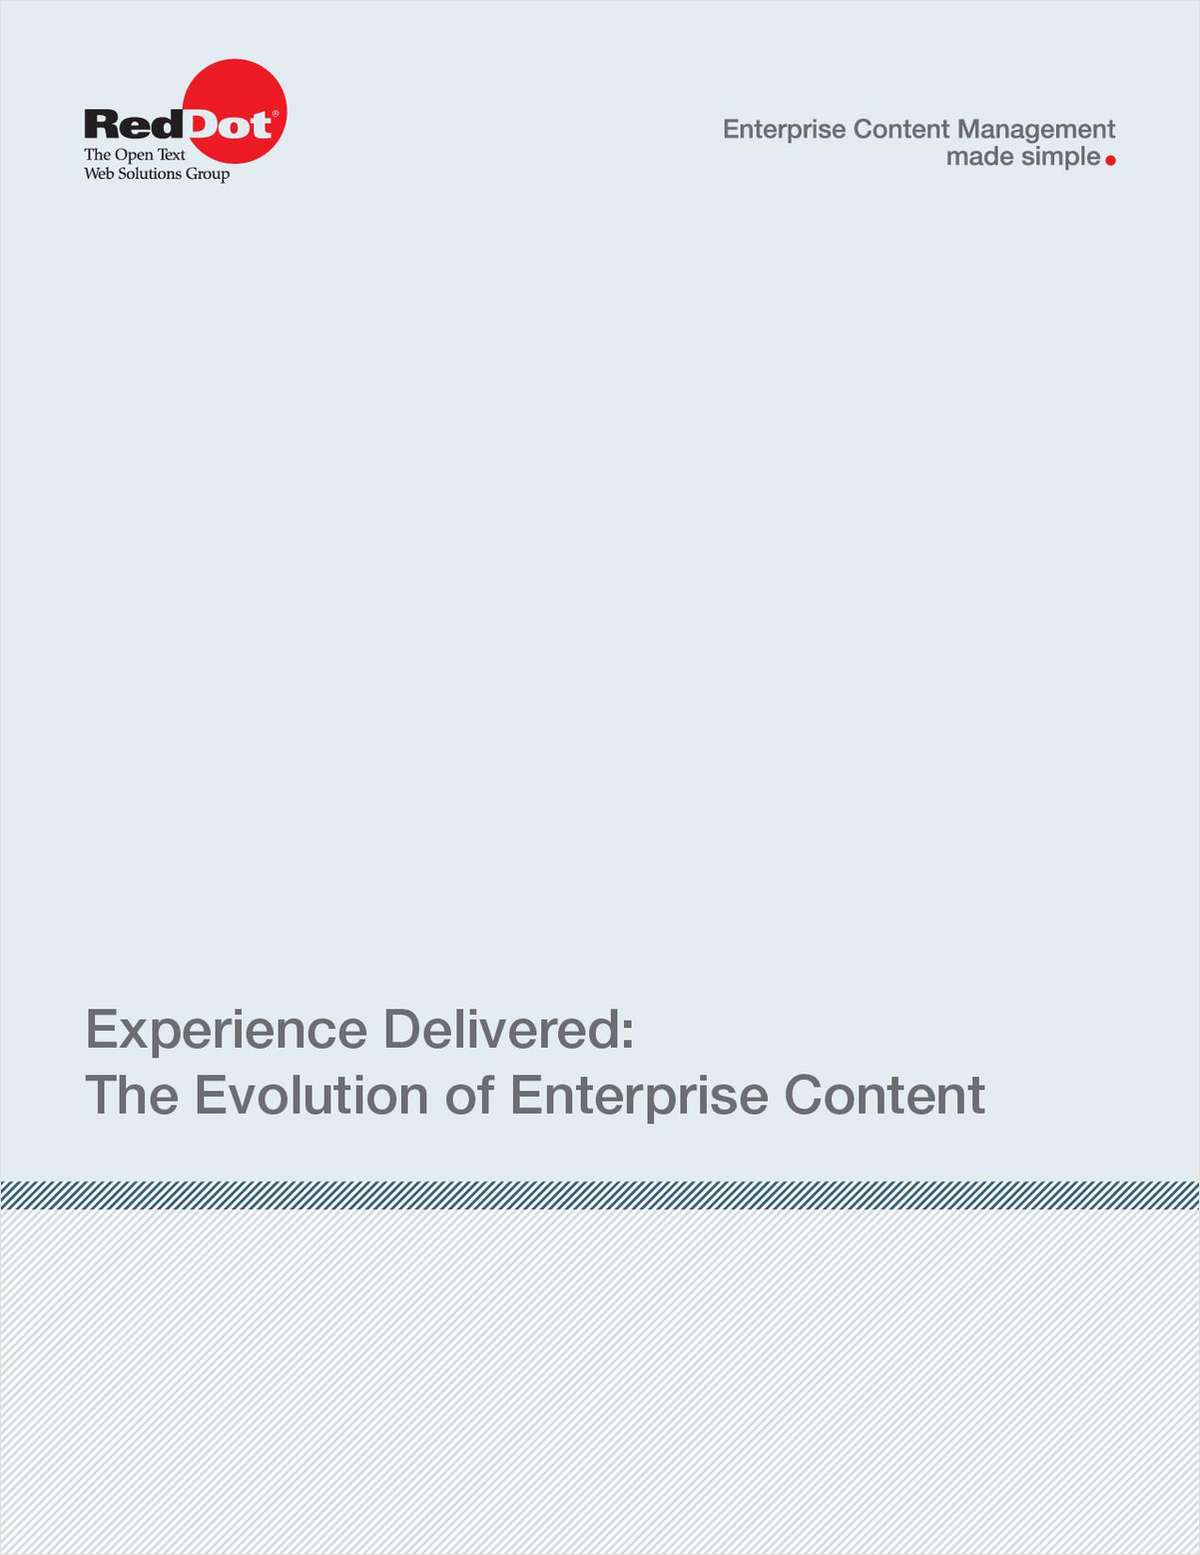 Experience Delivered:The Evolution of Enterprise Content